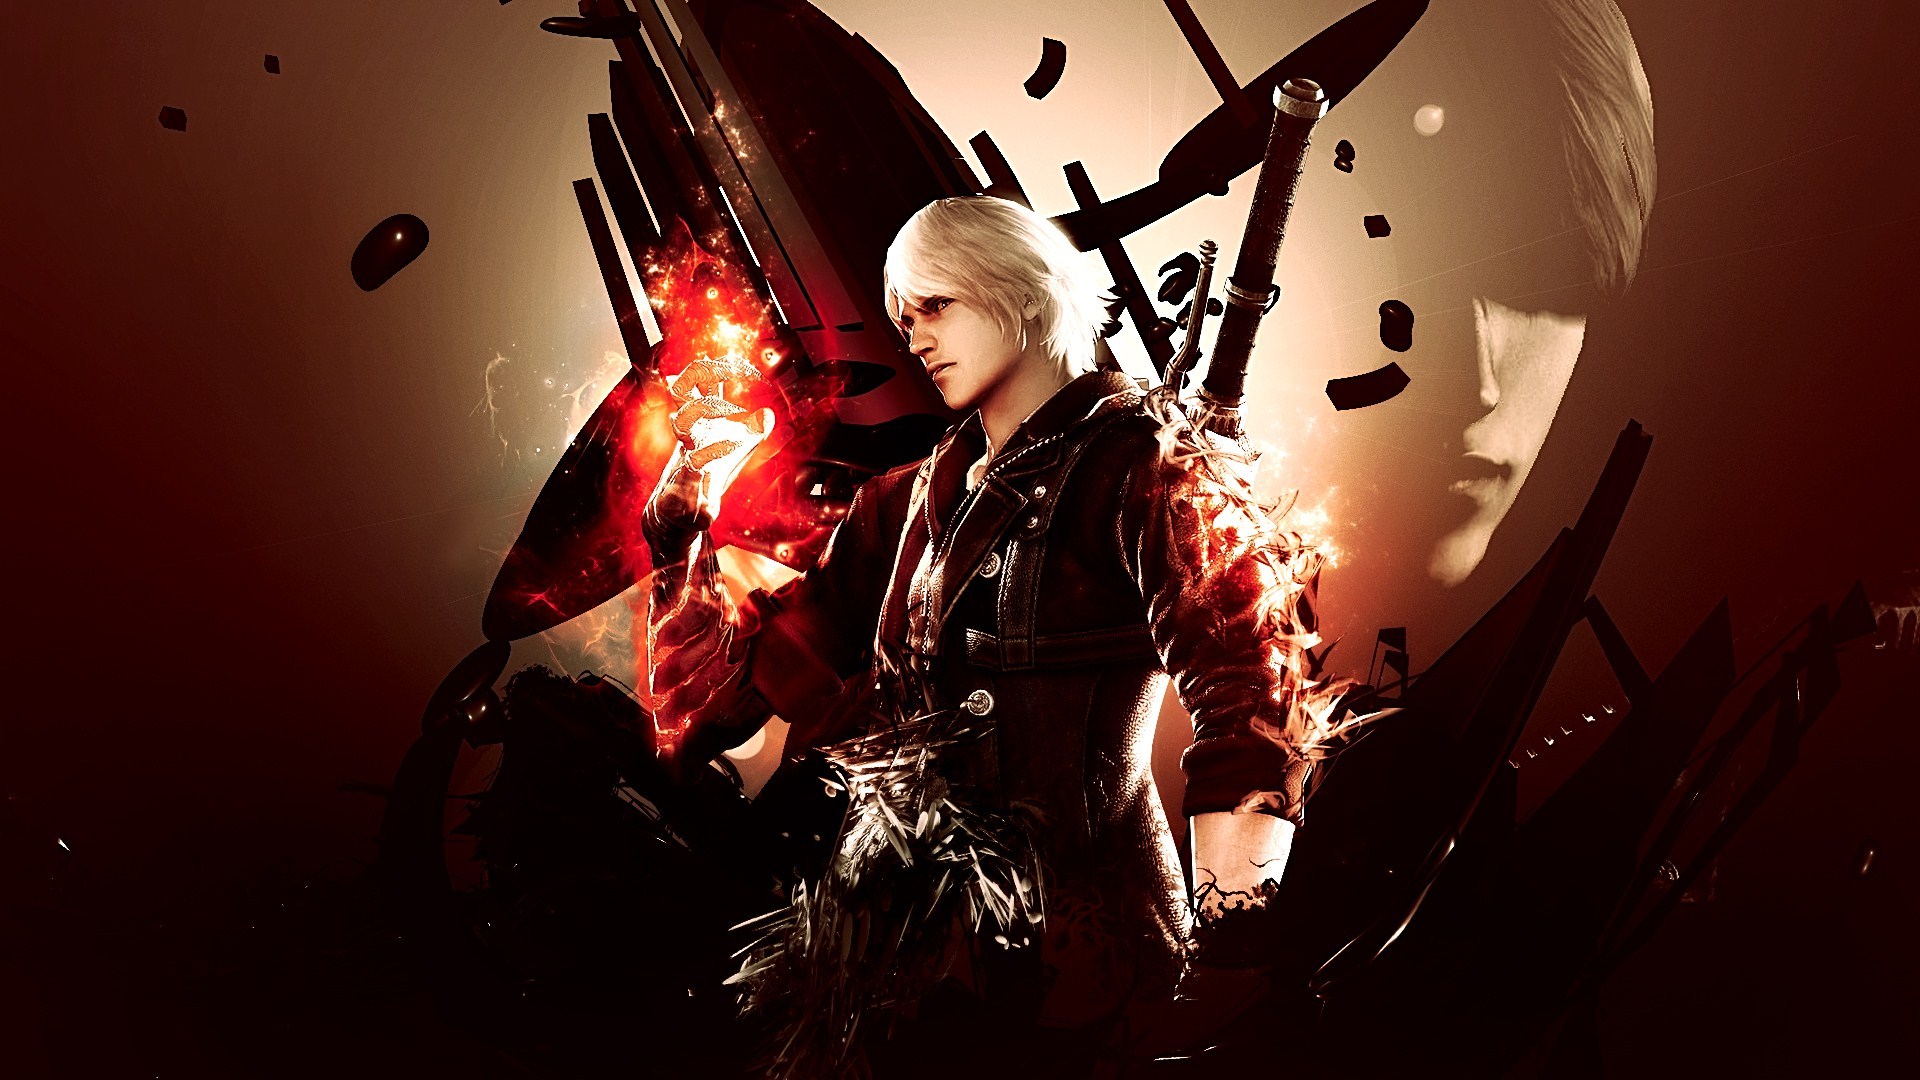 Devil May Cry 5 Wallpaper wallpapers Devil May Cry 5 Wallpaper stock